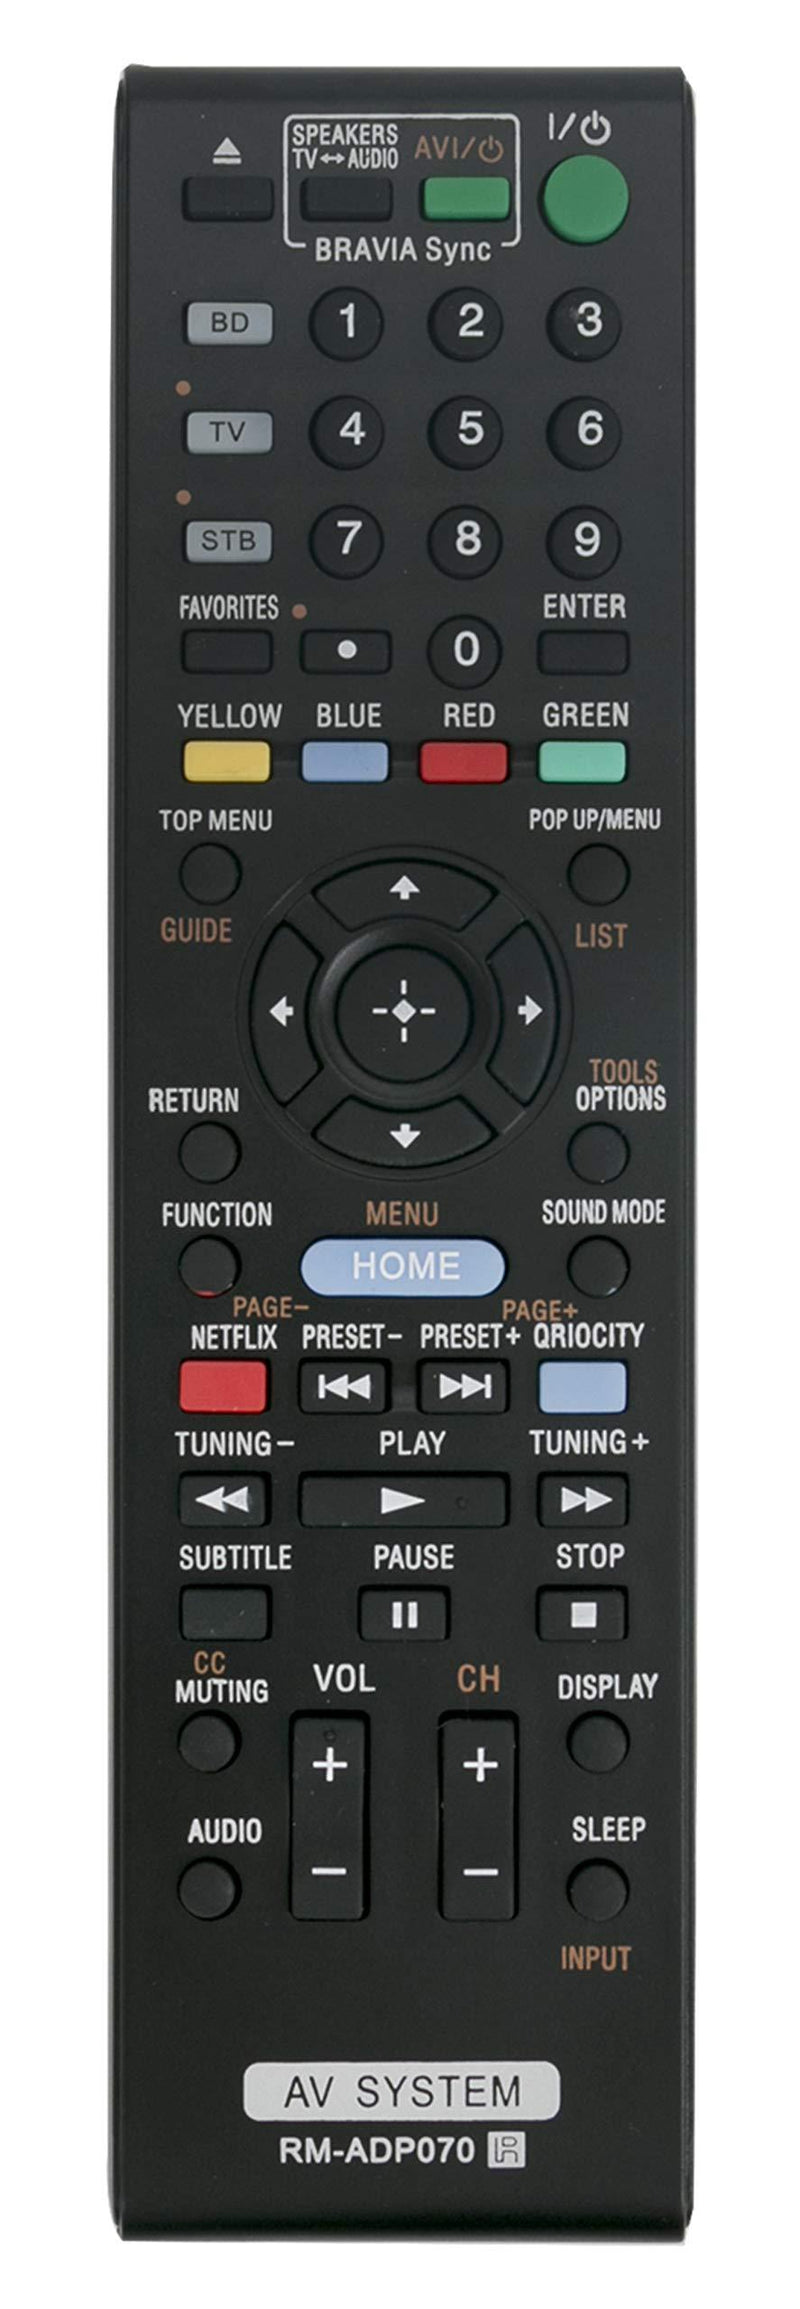 New RM-ADP070 Replaced Remote fit for Sony BDV-E780W RM-ADP059 HBD-E280 BDV-E980W HBD-E580 HBDE280 BDVE980W HBDE580 BDVE780W AV System Home Theater System